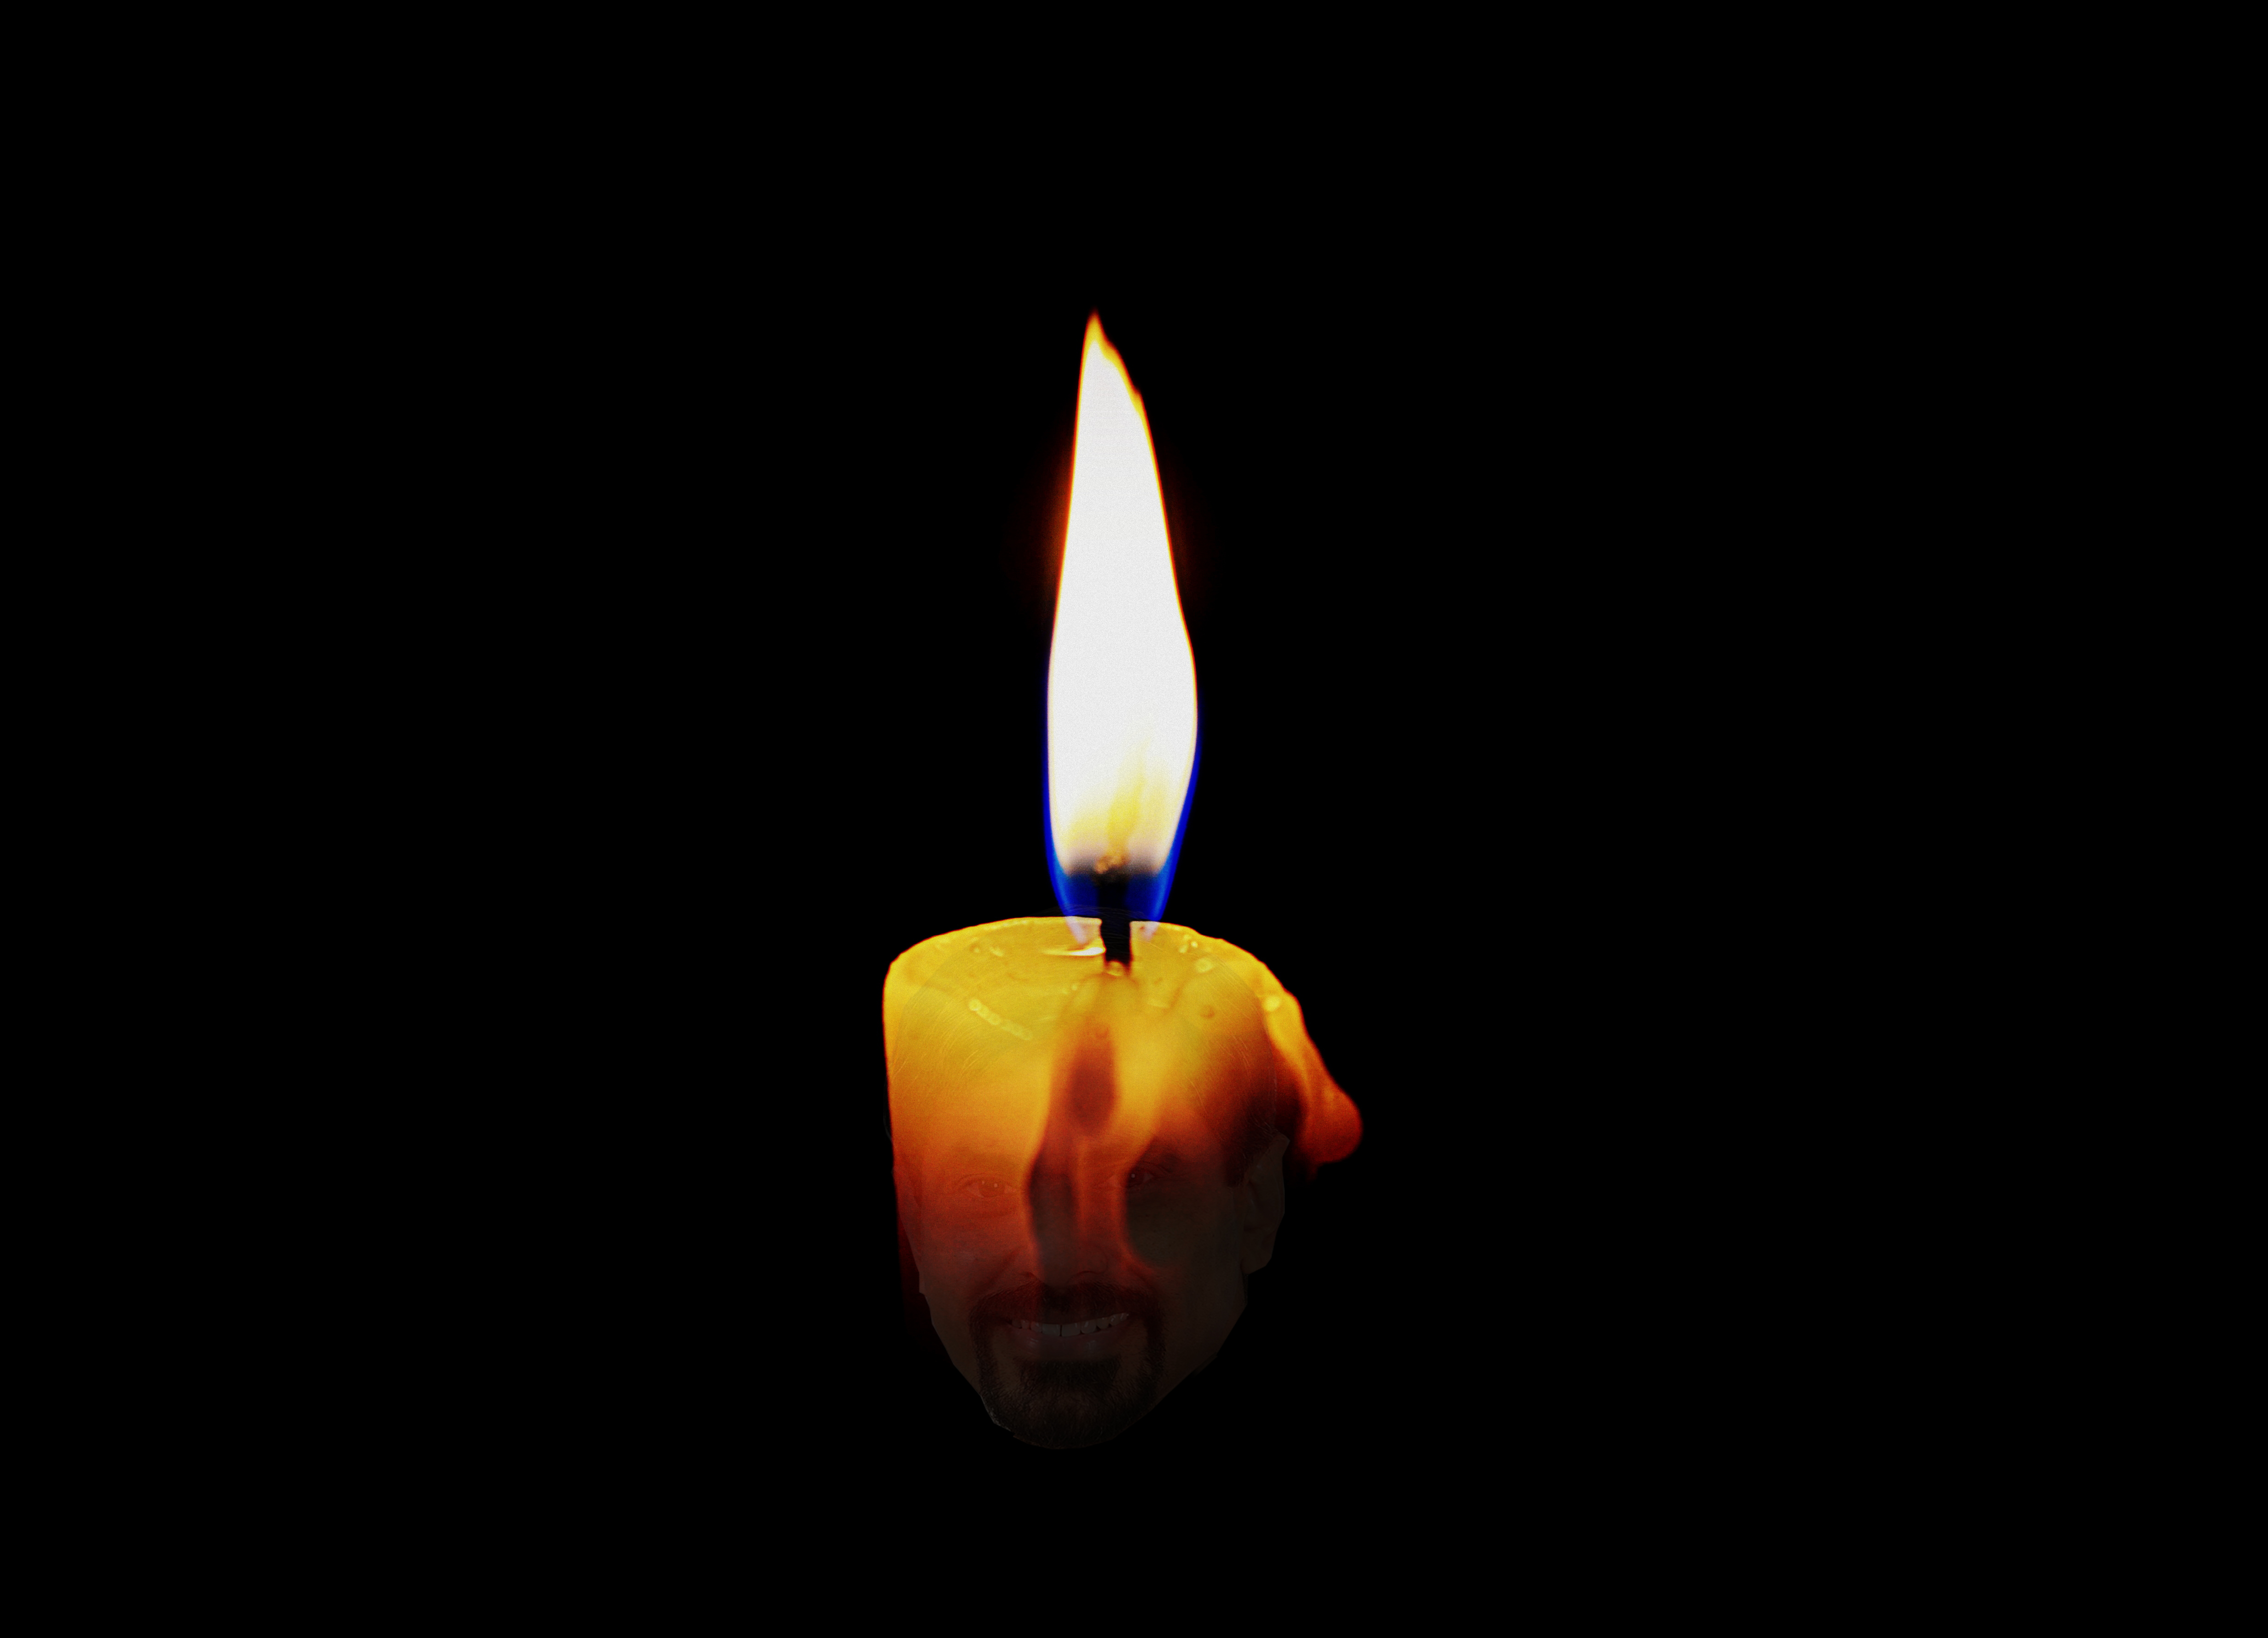 With Candle in Dark